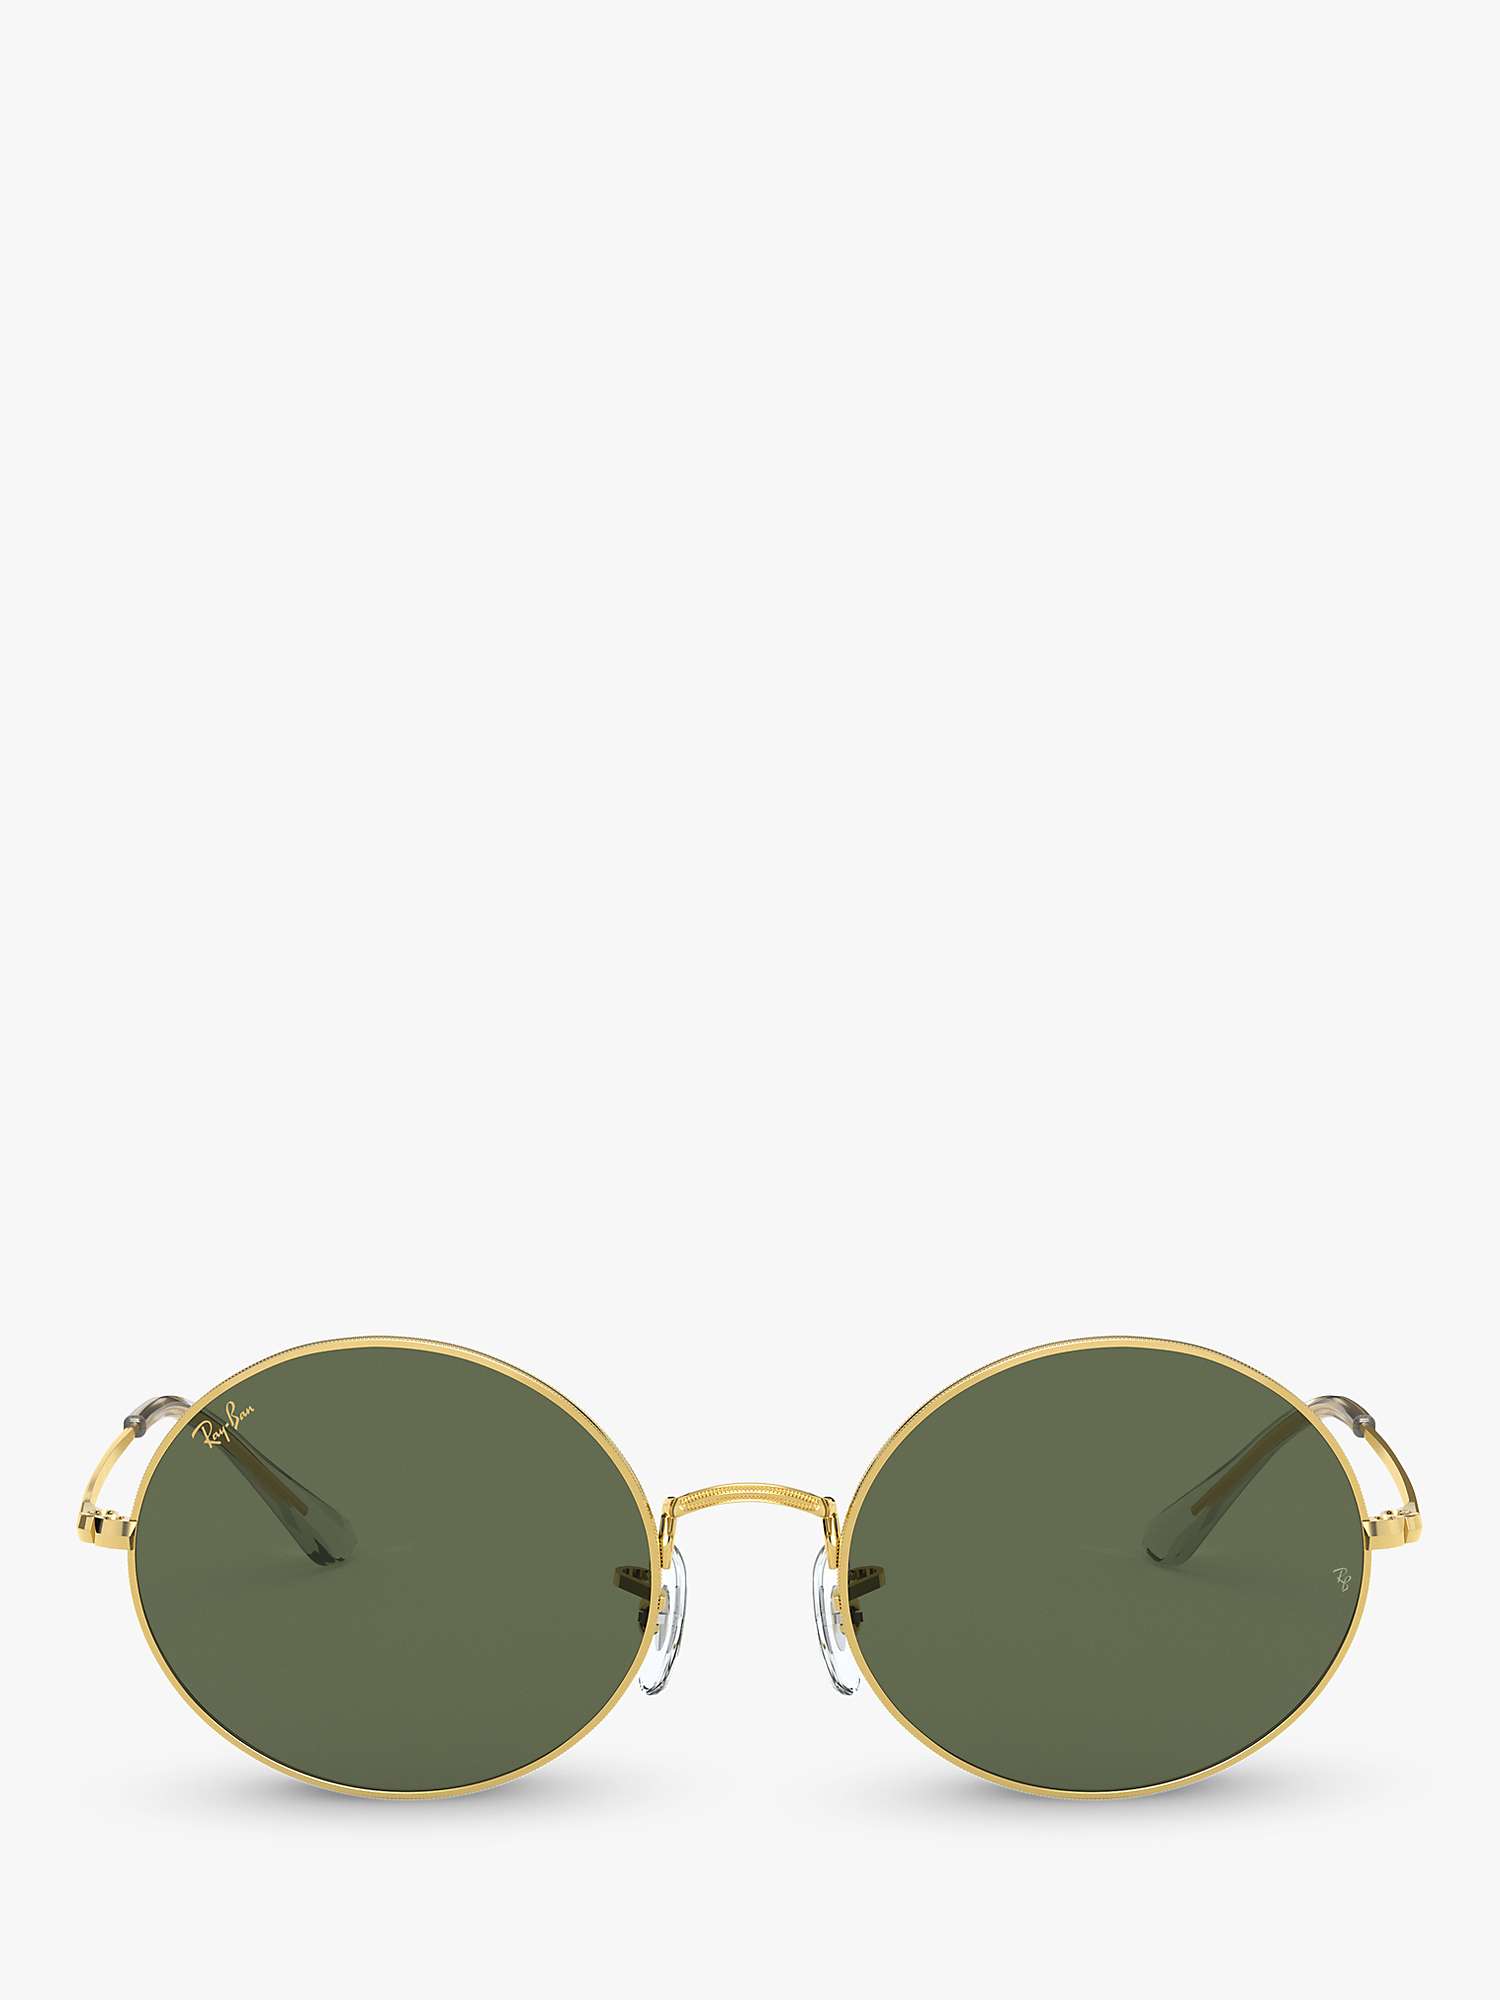 Buy Ray-Ban RB1970 Unisex Oval Sunglasses, Legend Gold/Green Online at johnlewis.com